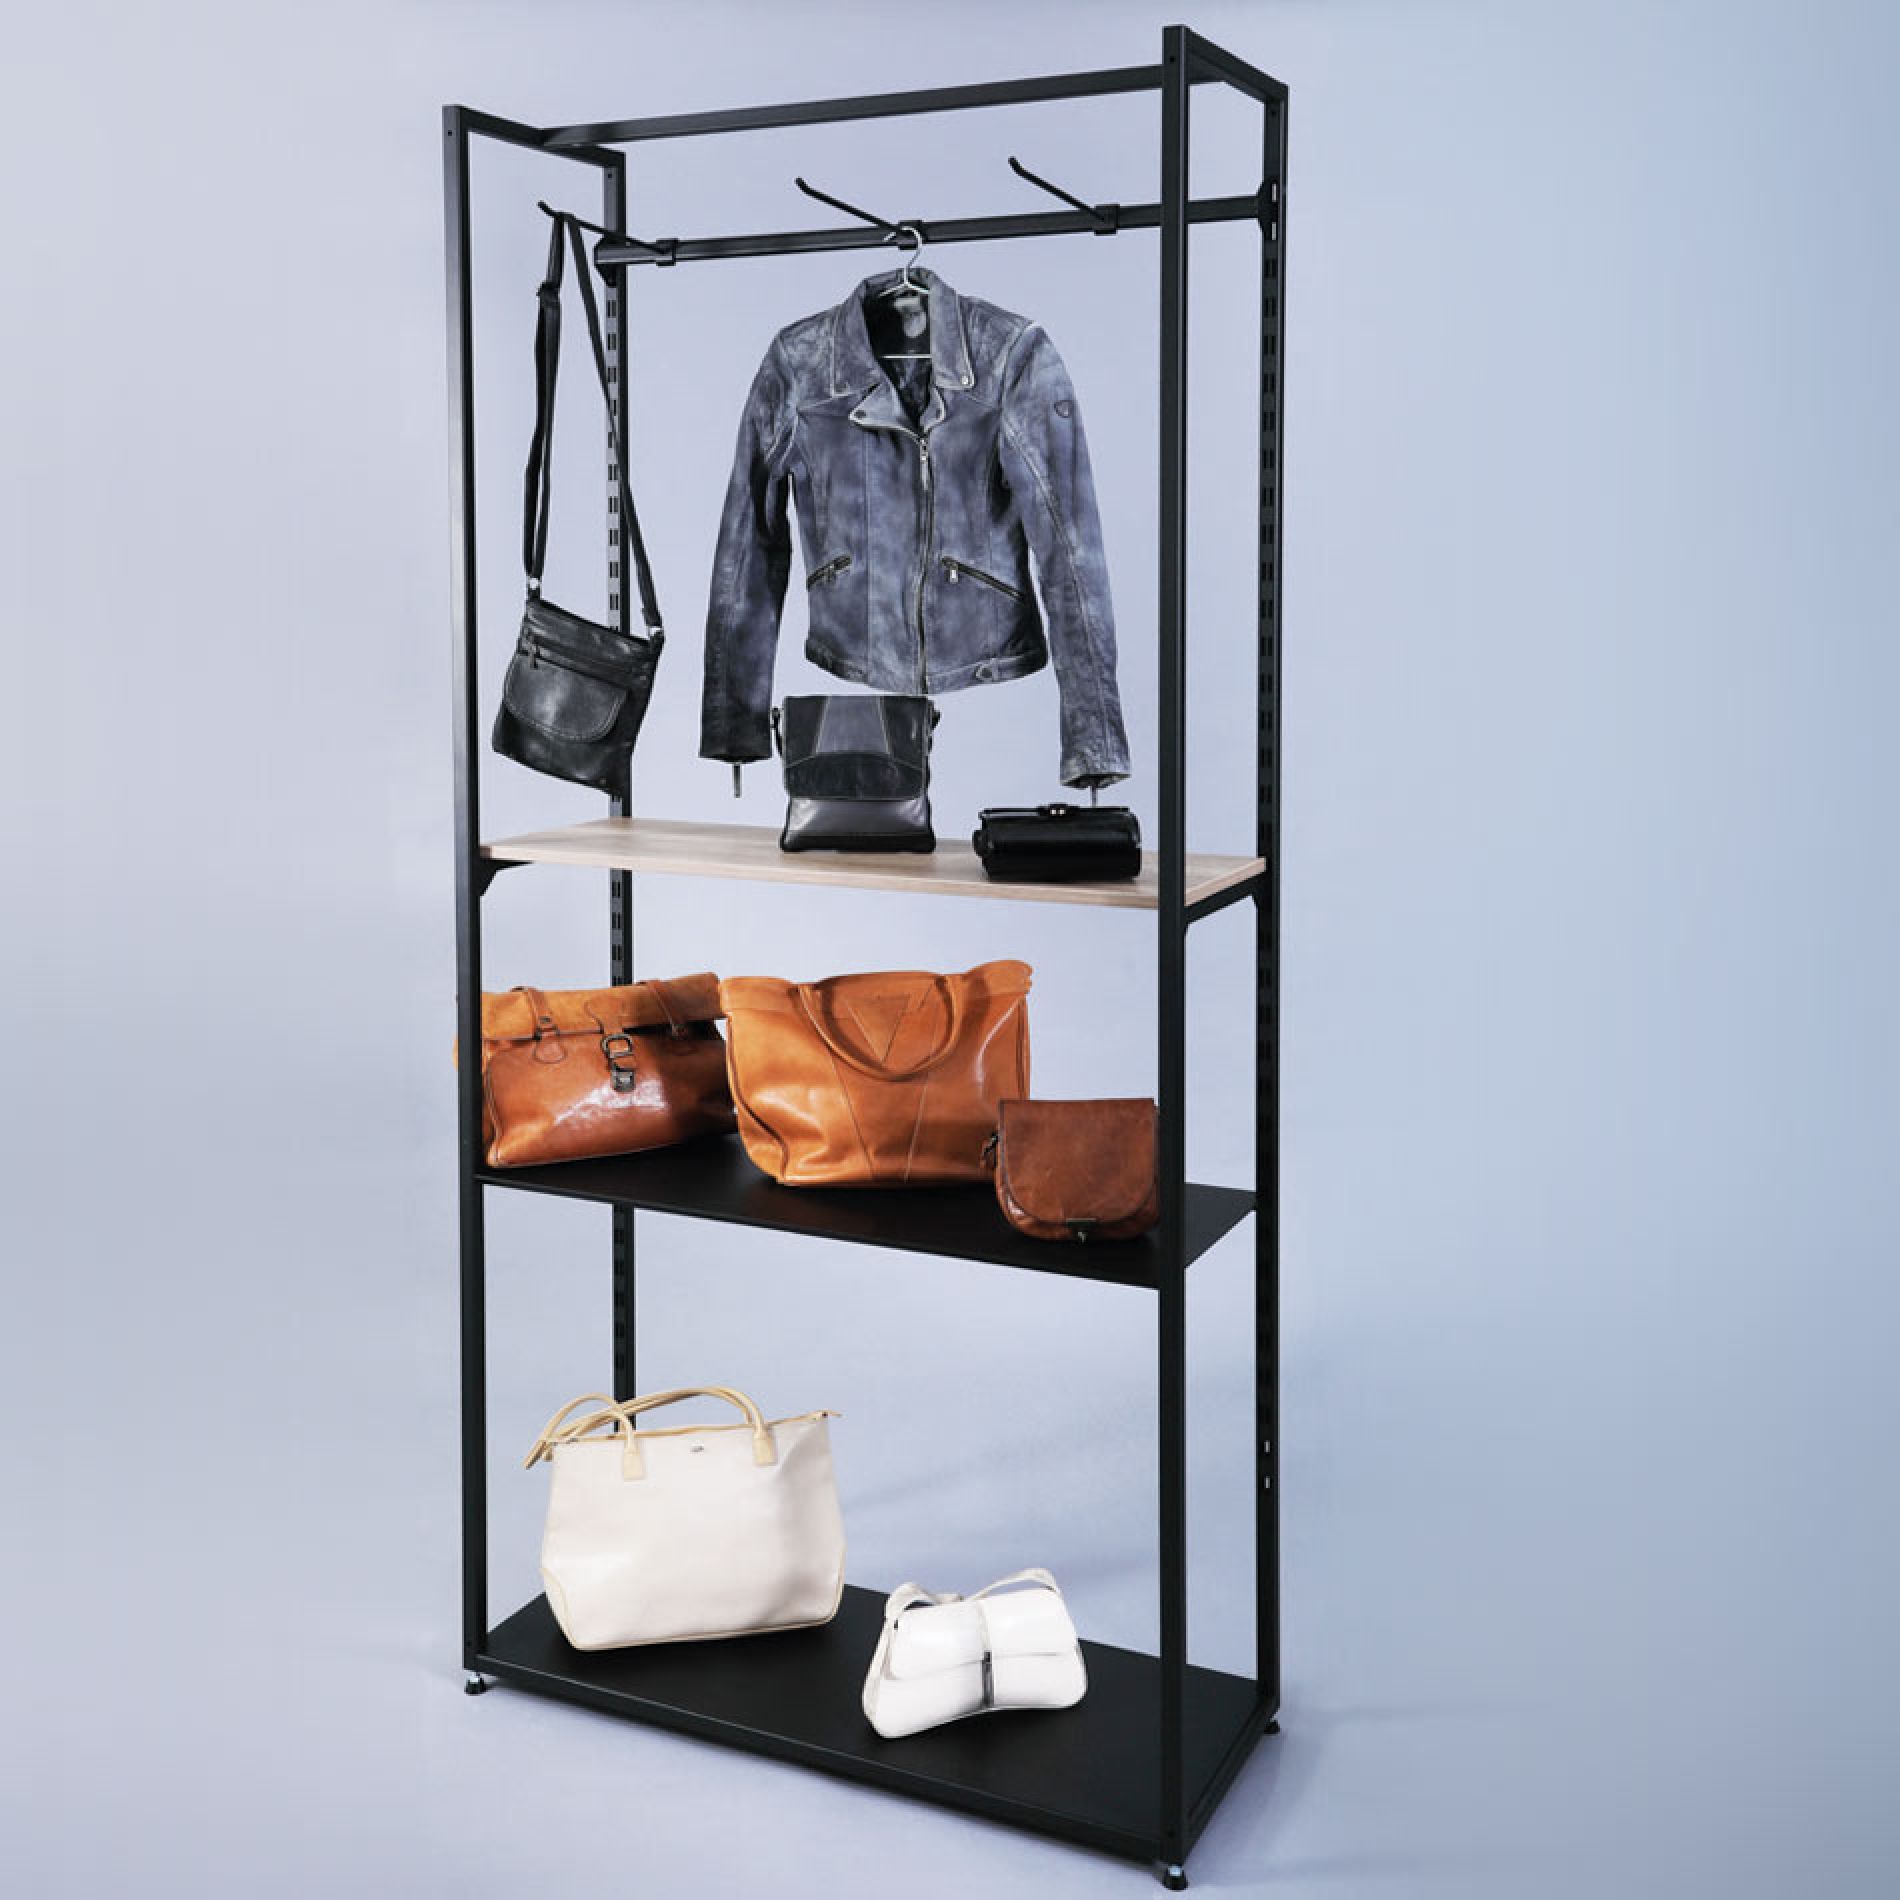 CLOTHES HANGER SYSTEM STAINLESS STEEL Gallery Image